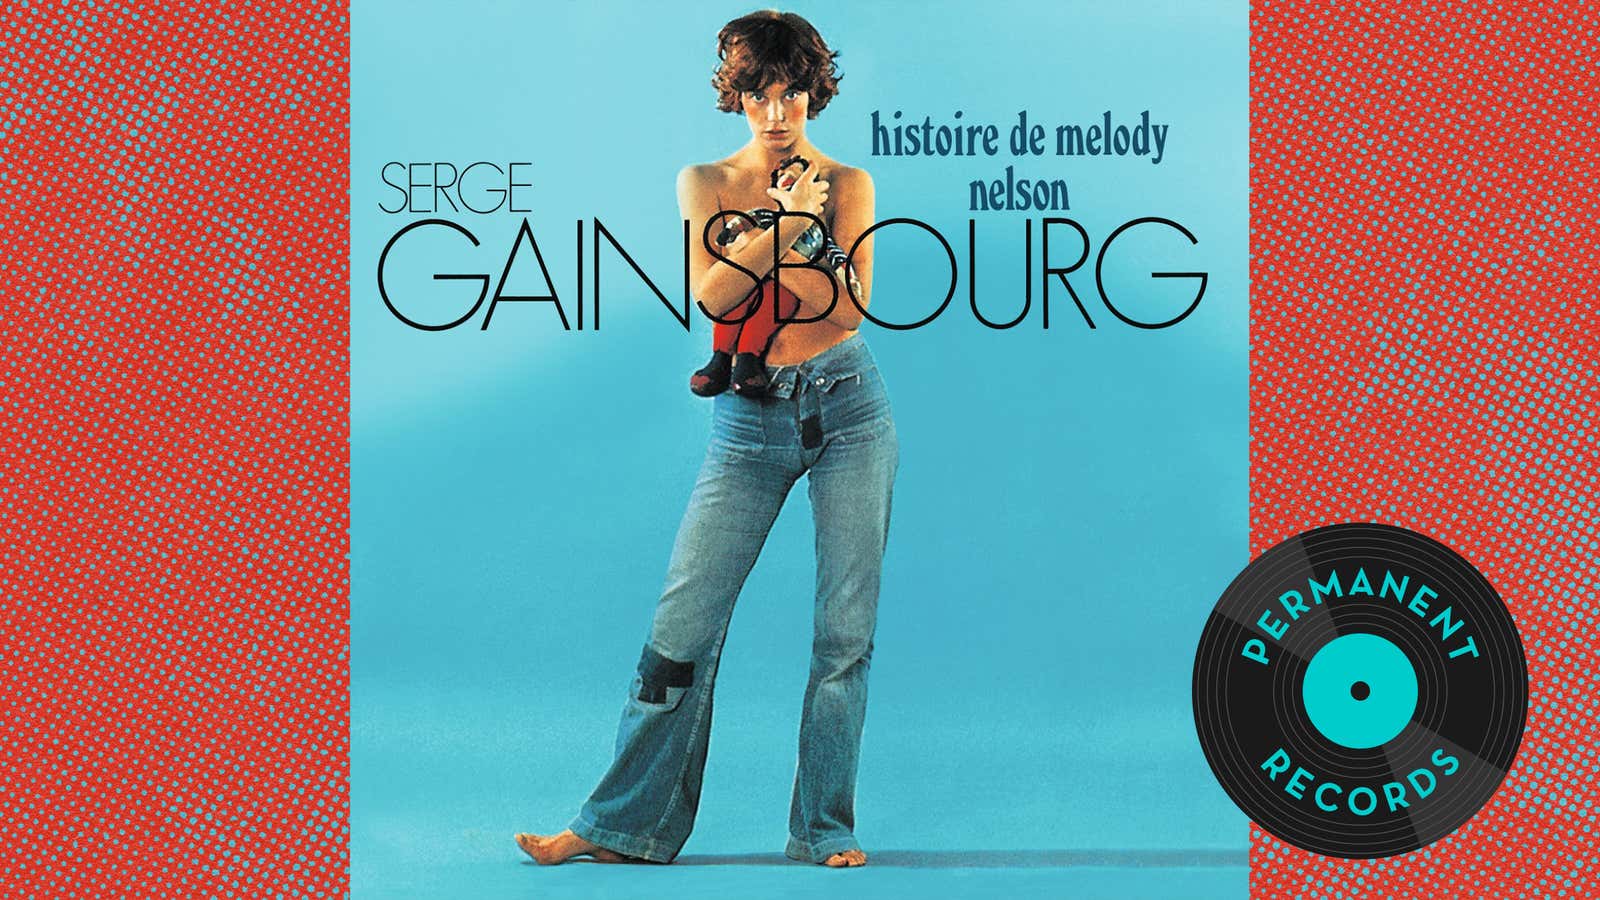 With <i>Histoire De Melody Nelson</i>, Serge Gainsbourg composed a French sex god’s teenage symphony